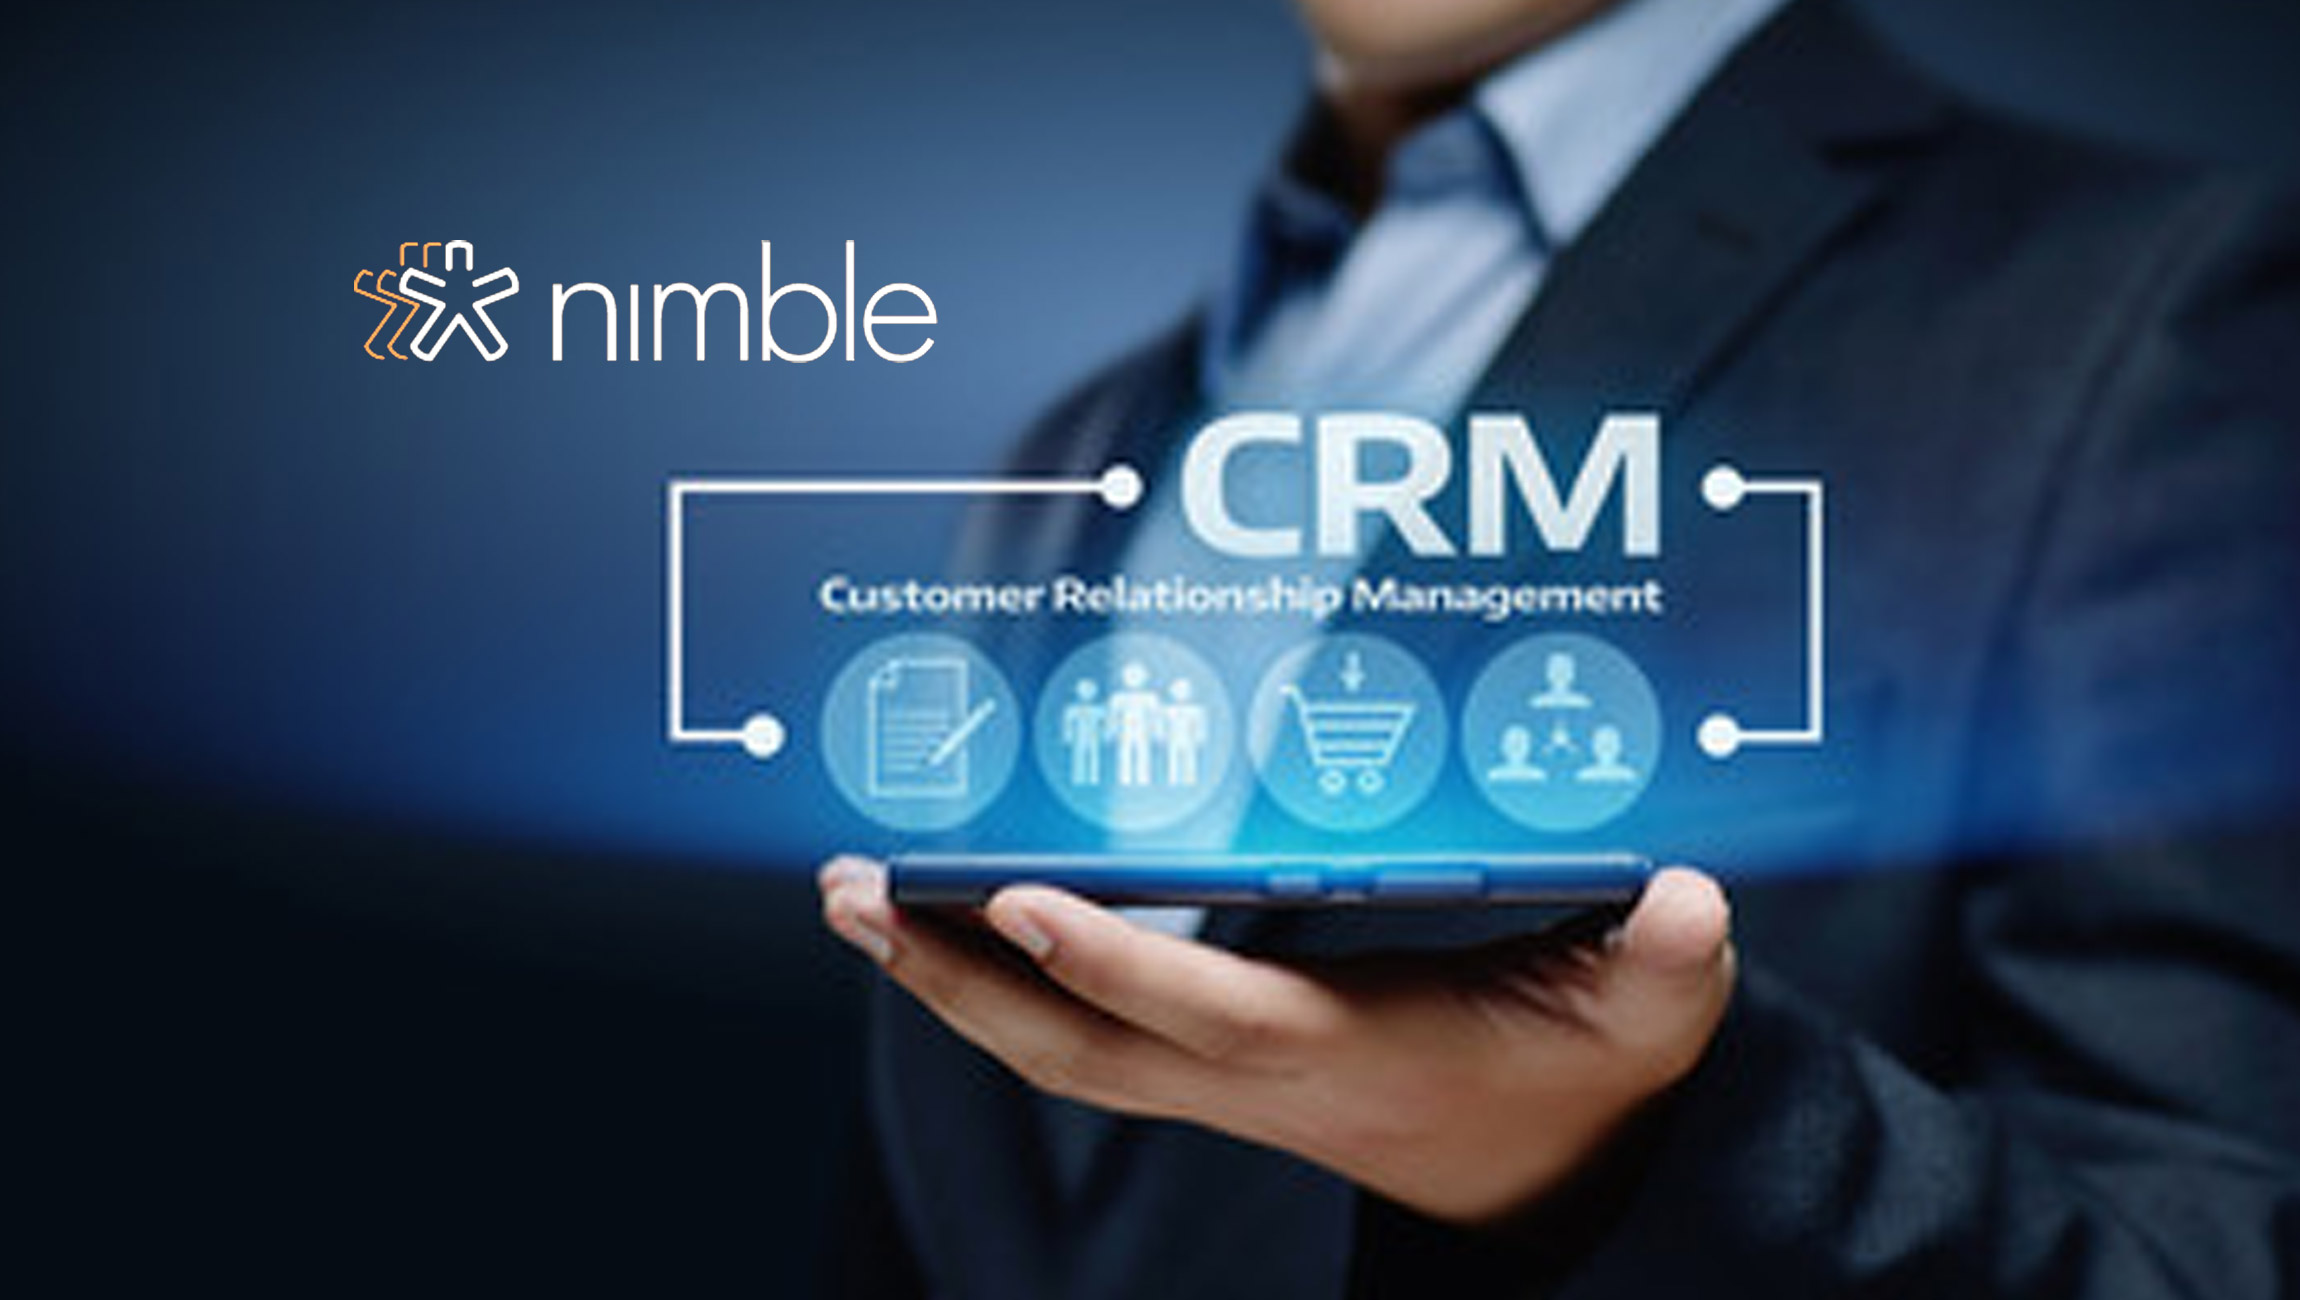 Nimble Crowned CRM Industry Leader And Top 5 Sales Intelligence Tool For Small Business Teams On G2